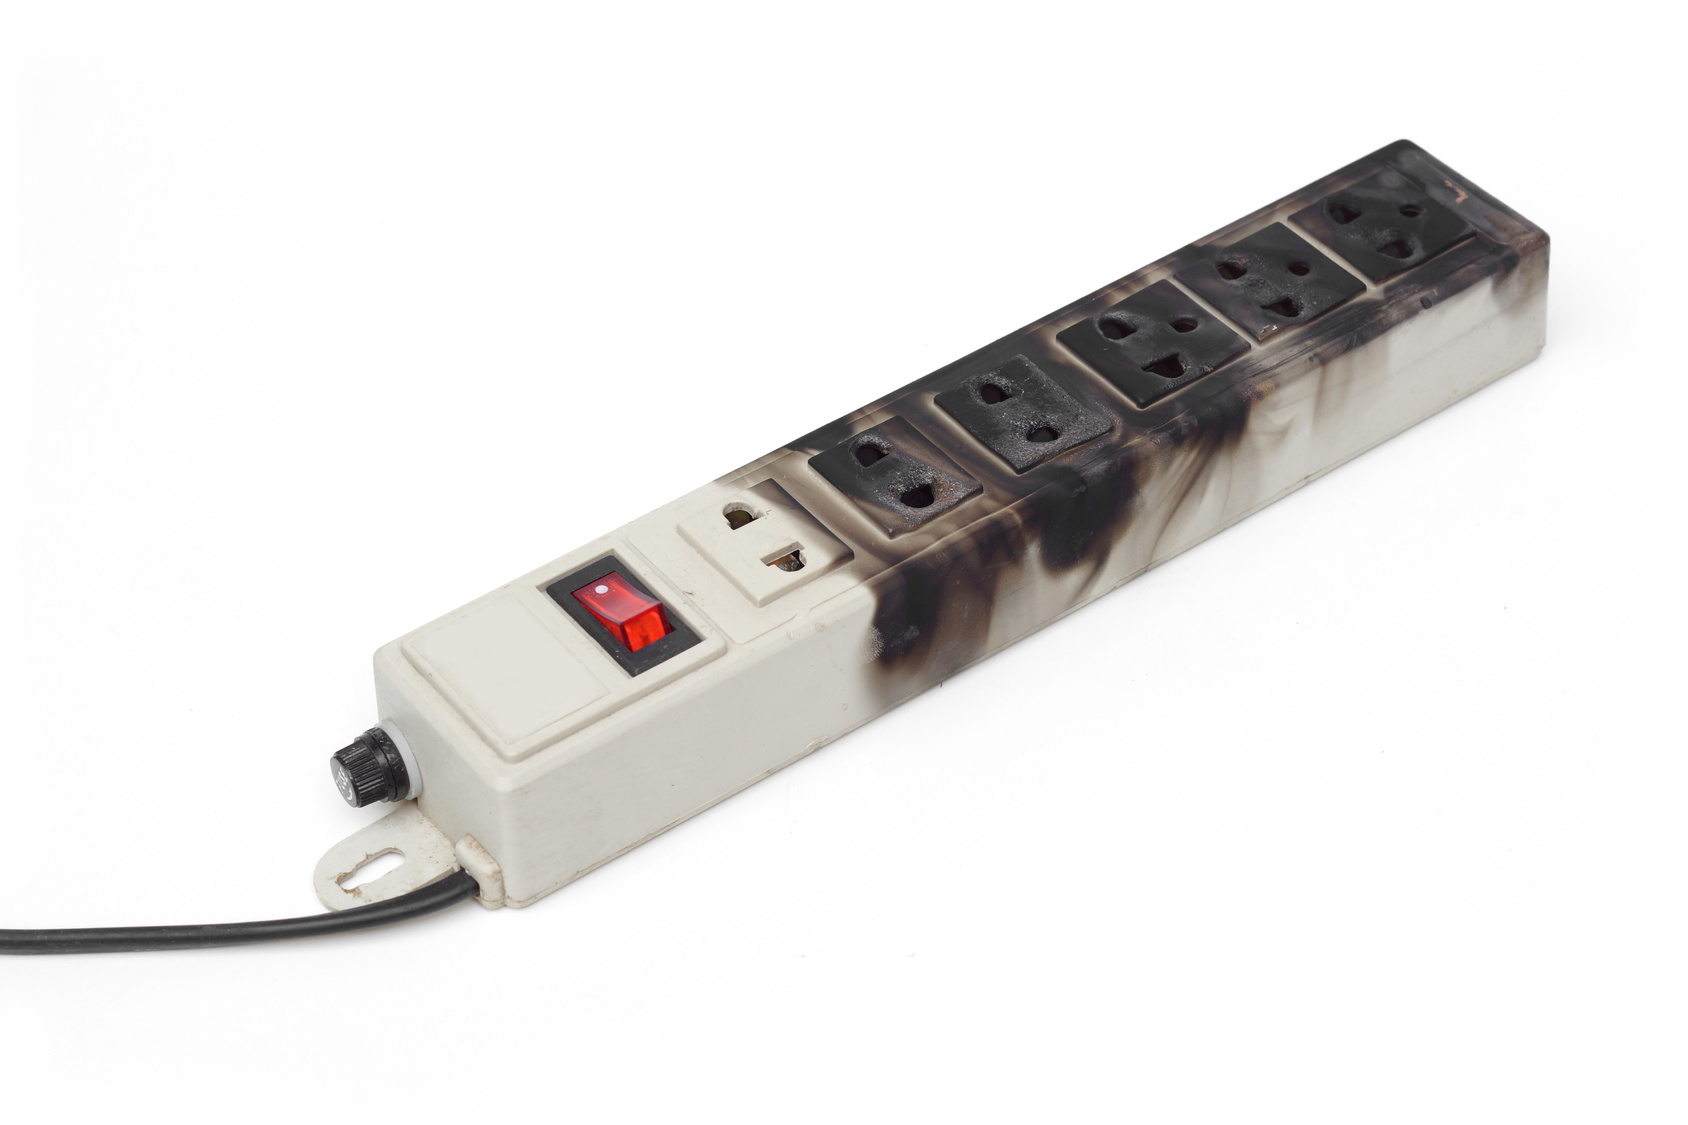 How Do You Know If A Surge Protector Is Bad